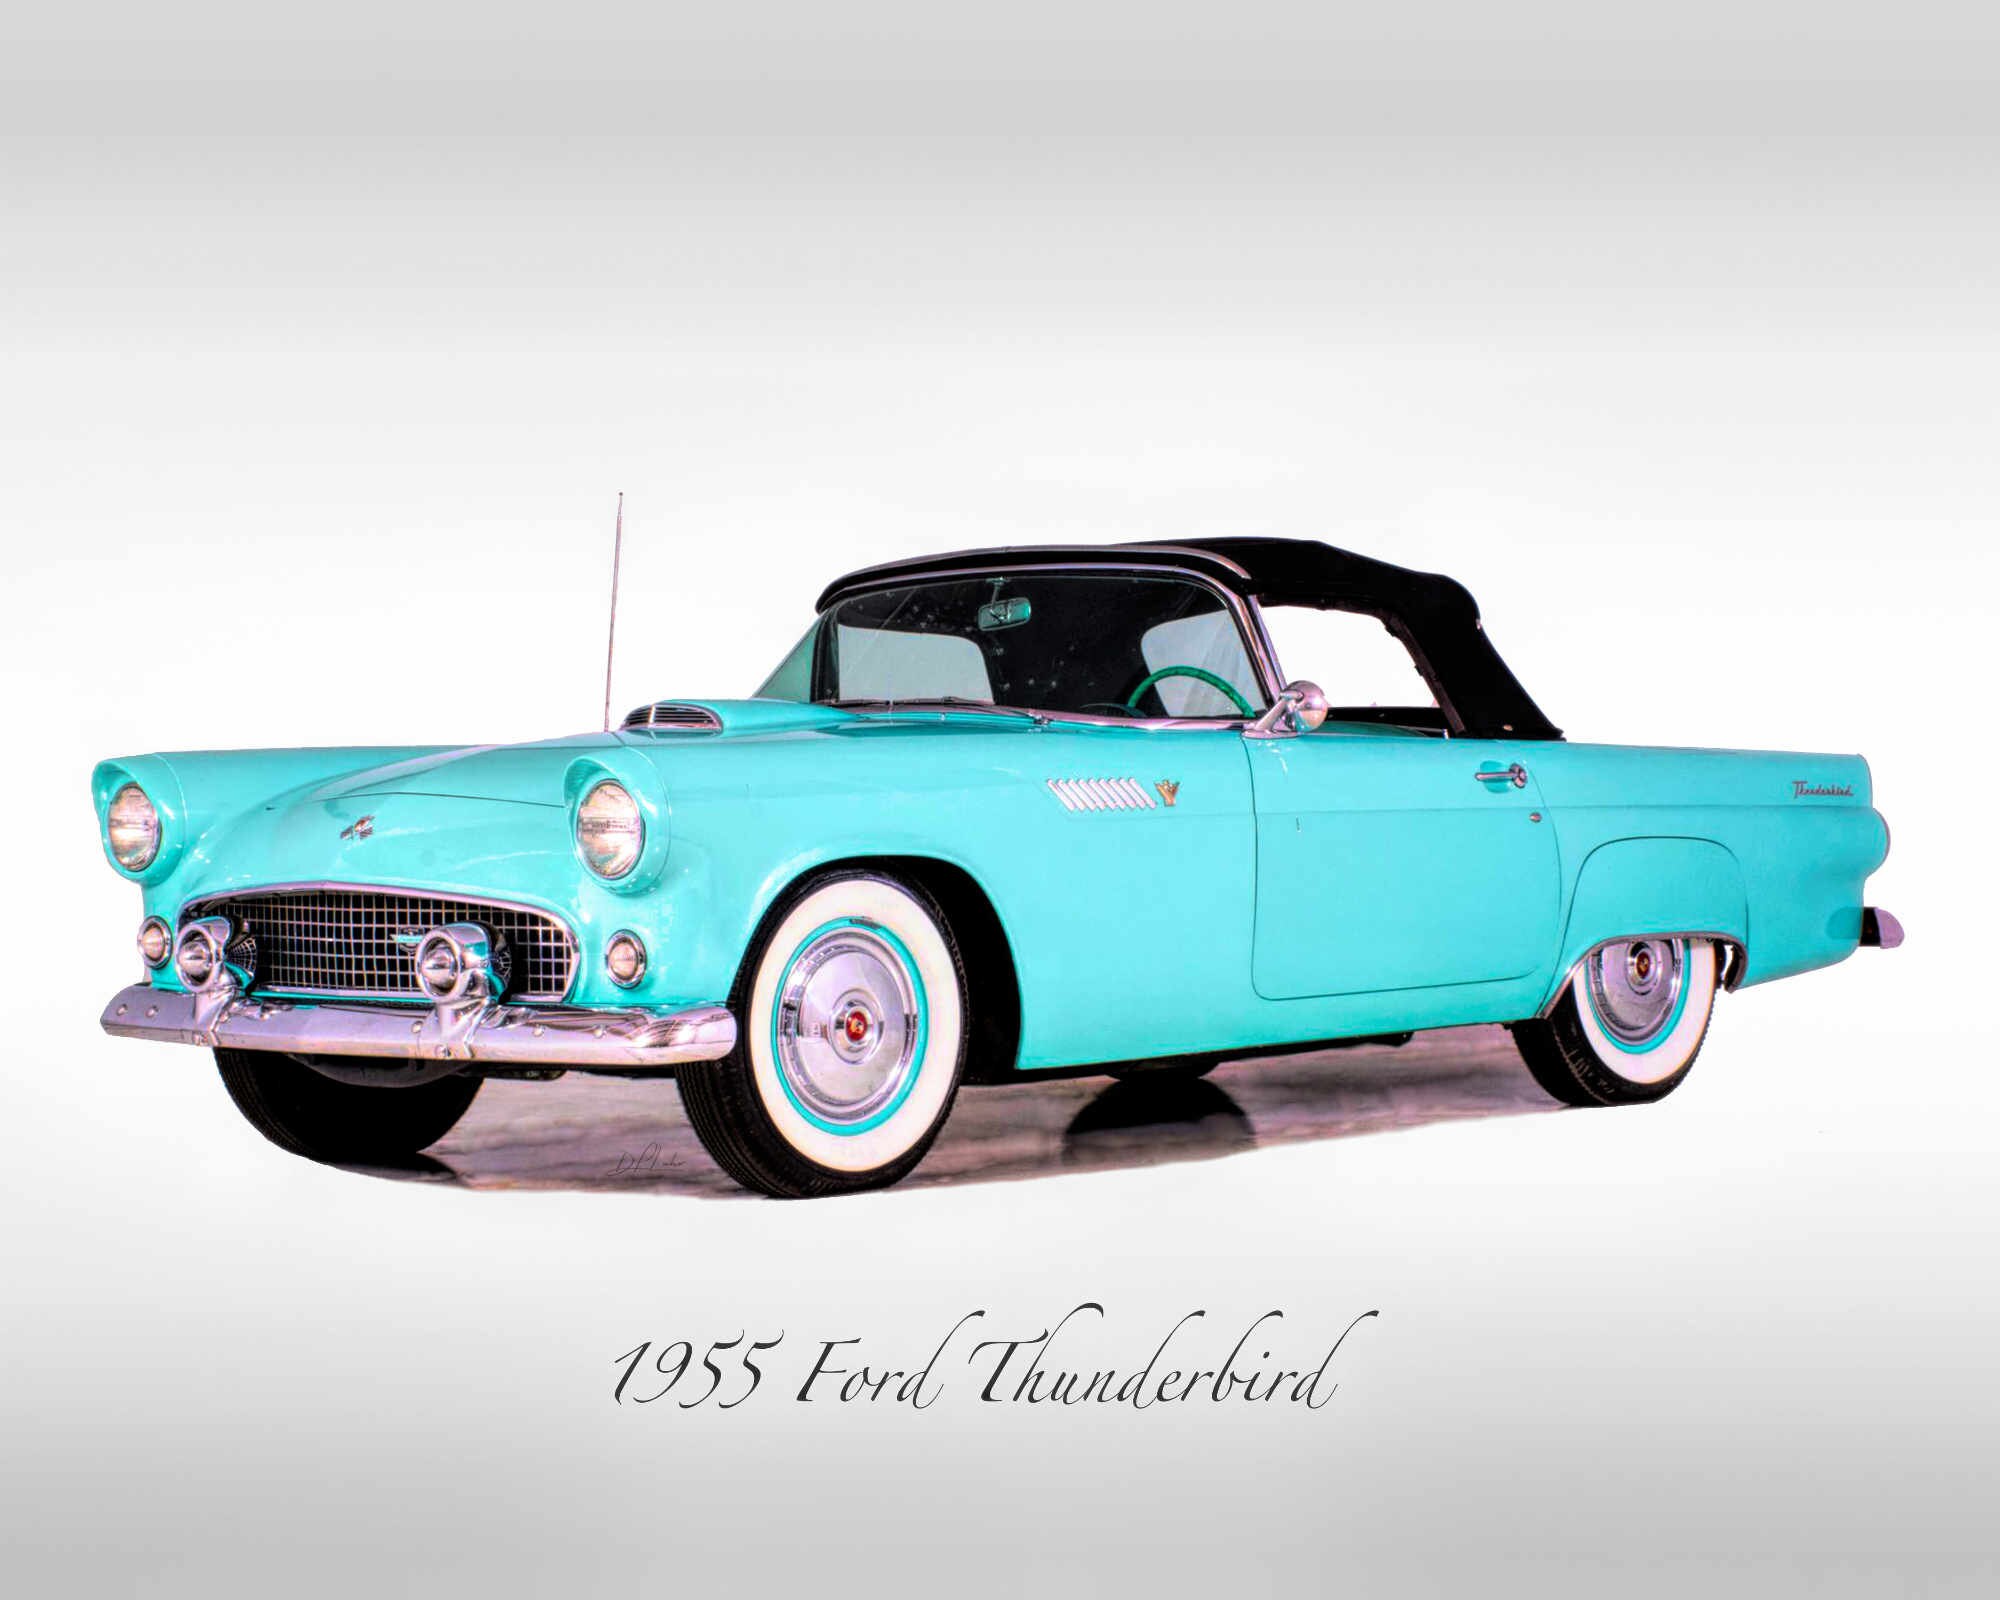 Collectable car Classic car Thunderbird Ford Original oil painting of antique car Vintage car